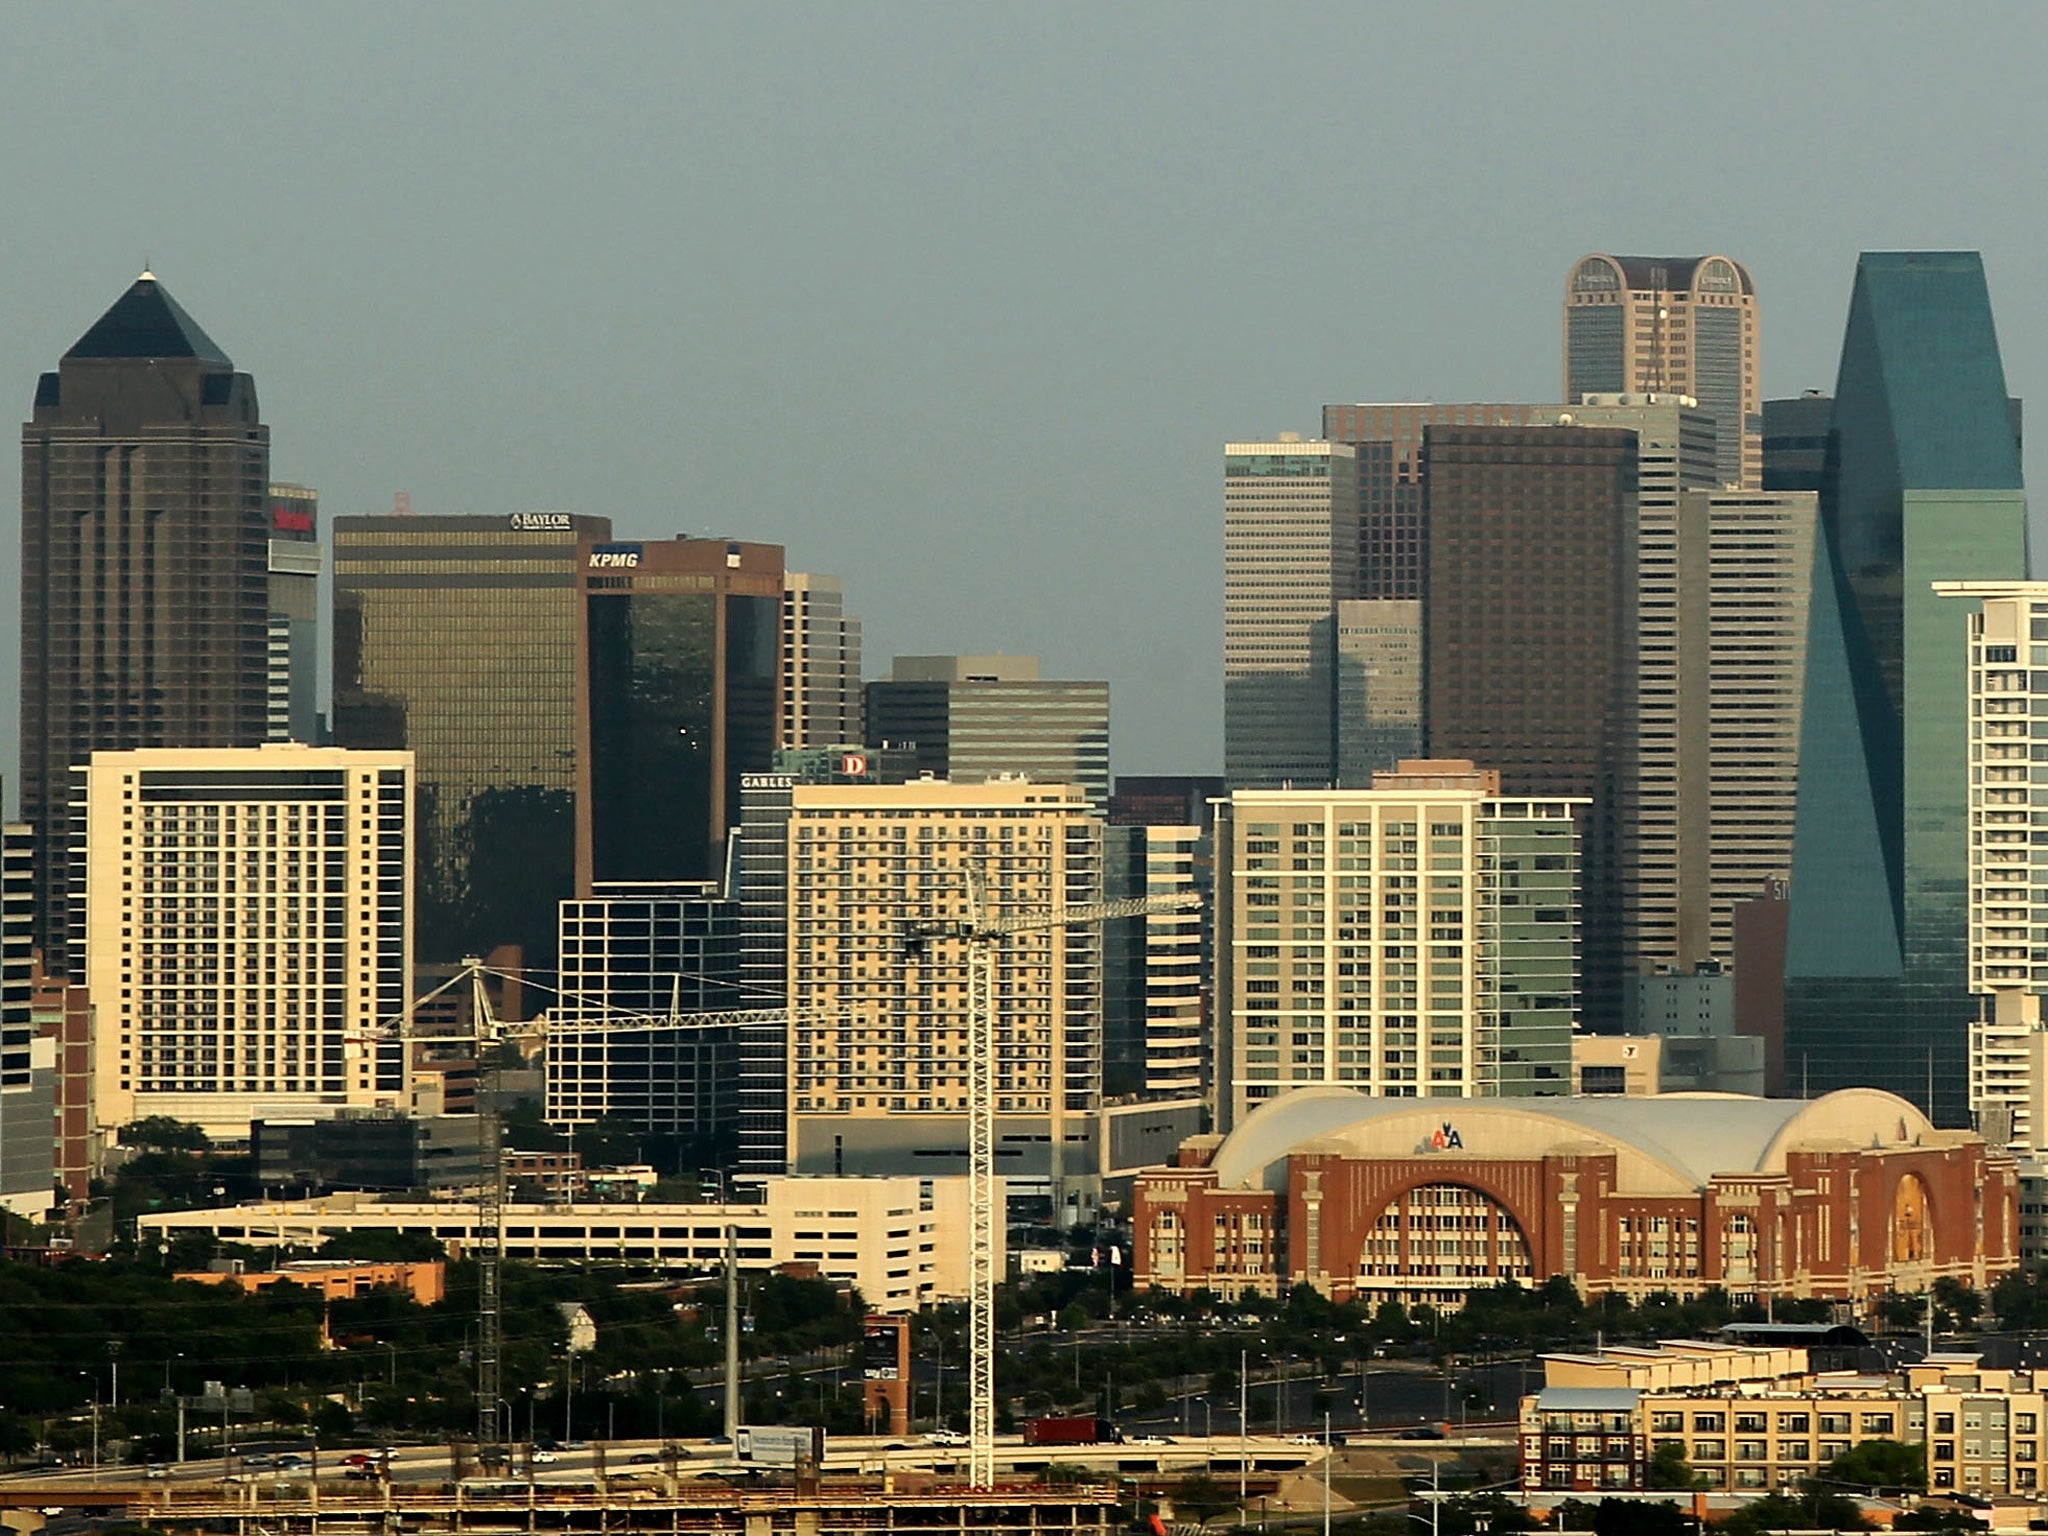 The skyline of downtown Dallas